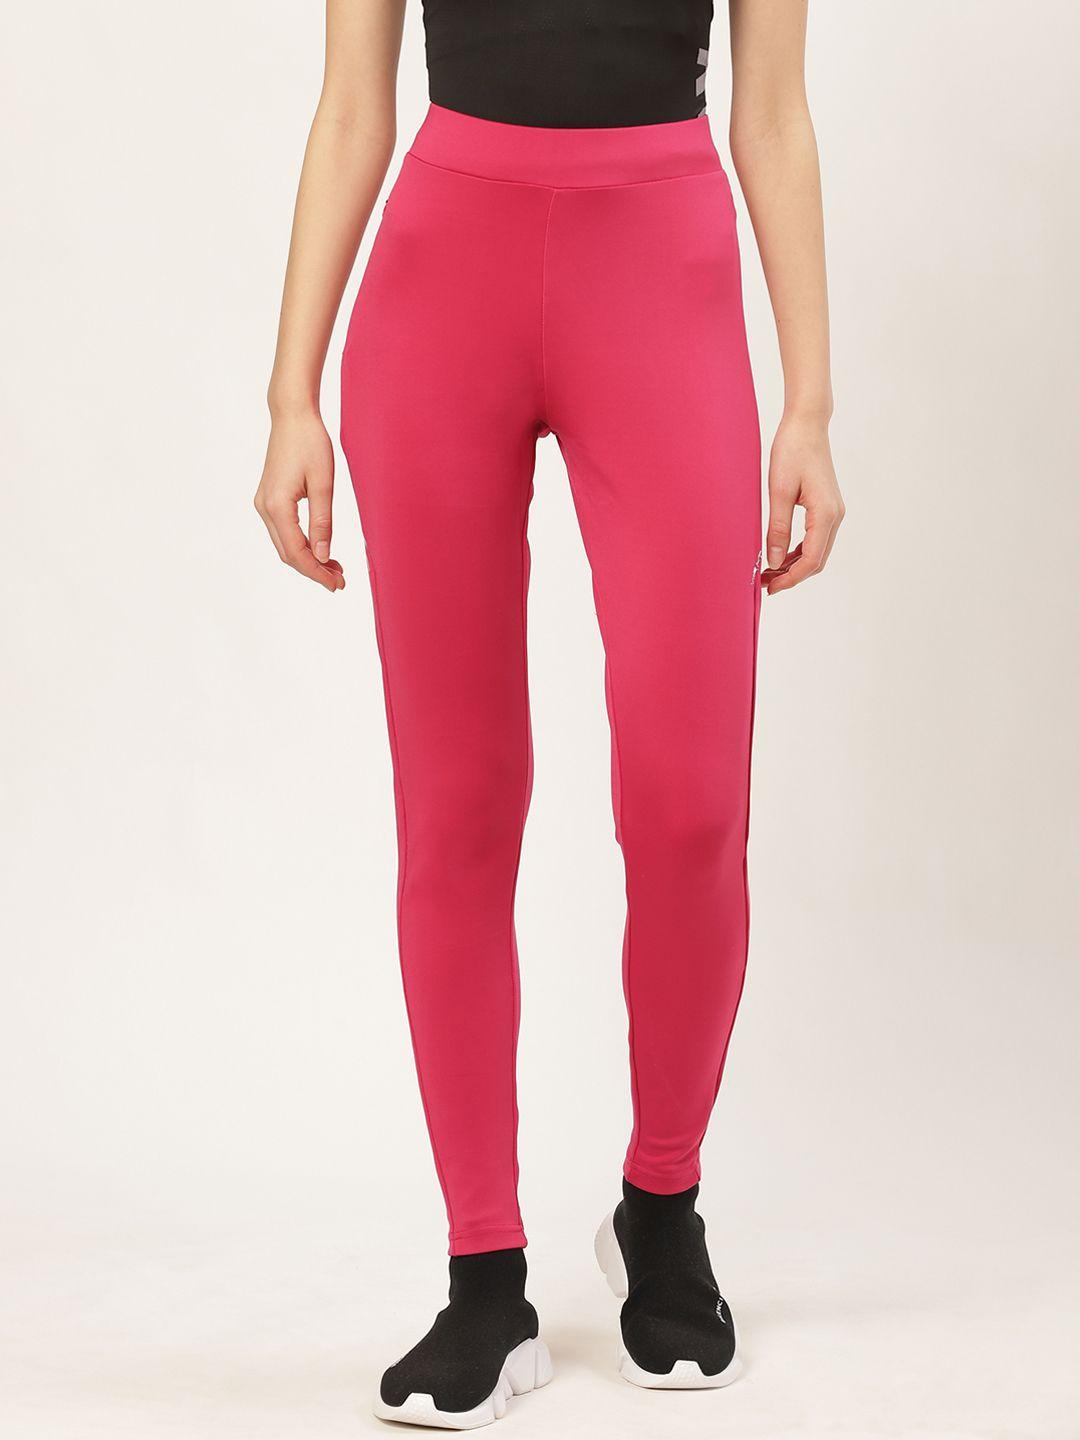 sweet-dreams-women-pink-solid-slim-fit-workout-track-pants